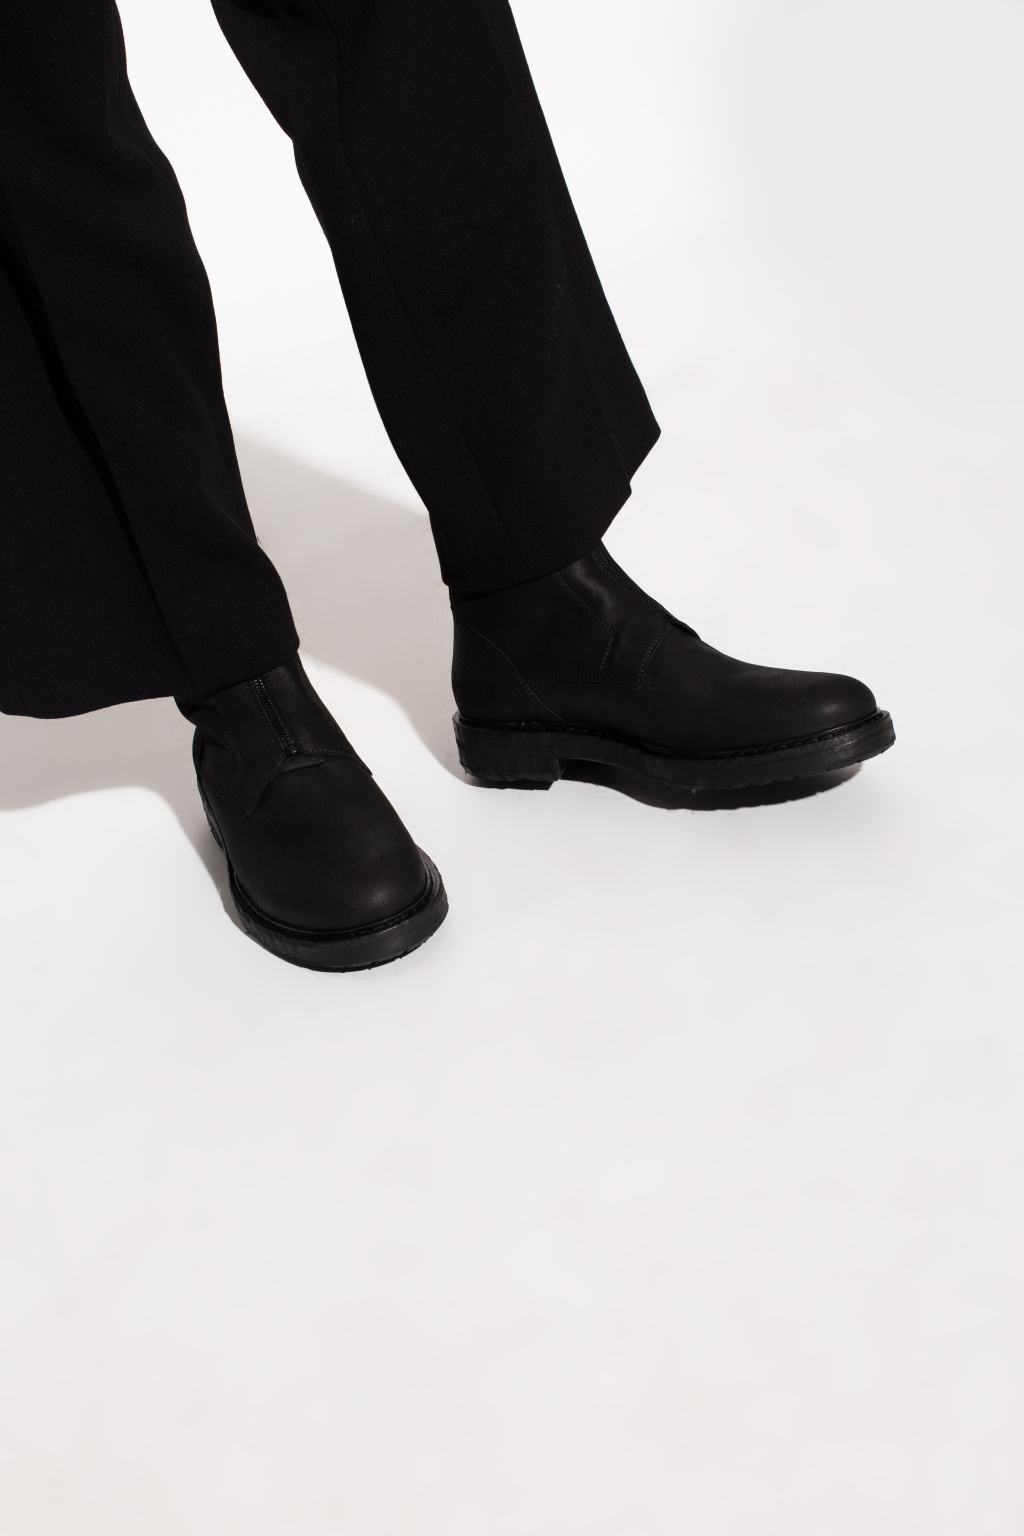 Ann Demeulemeester ‘Willy’ boots | Men's Shoes | Vitkac